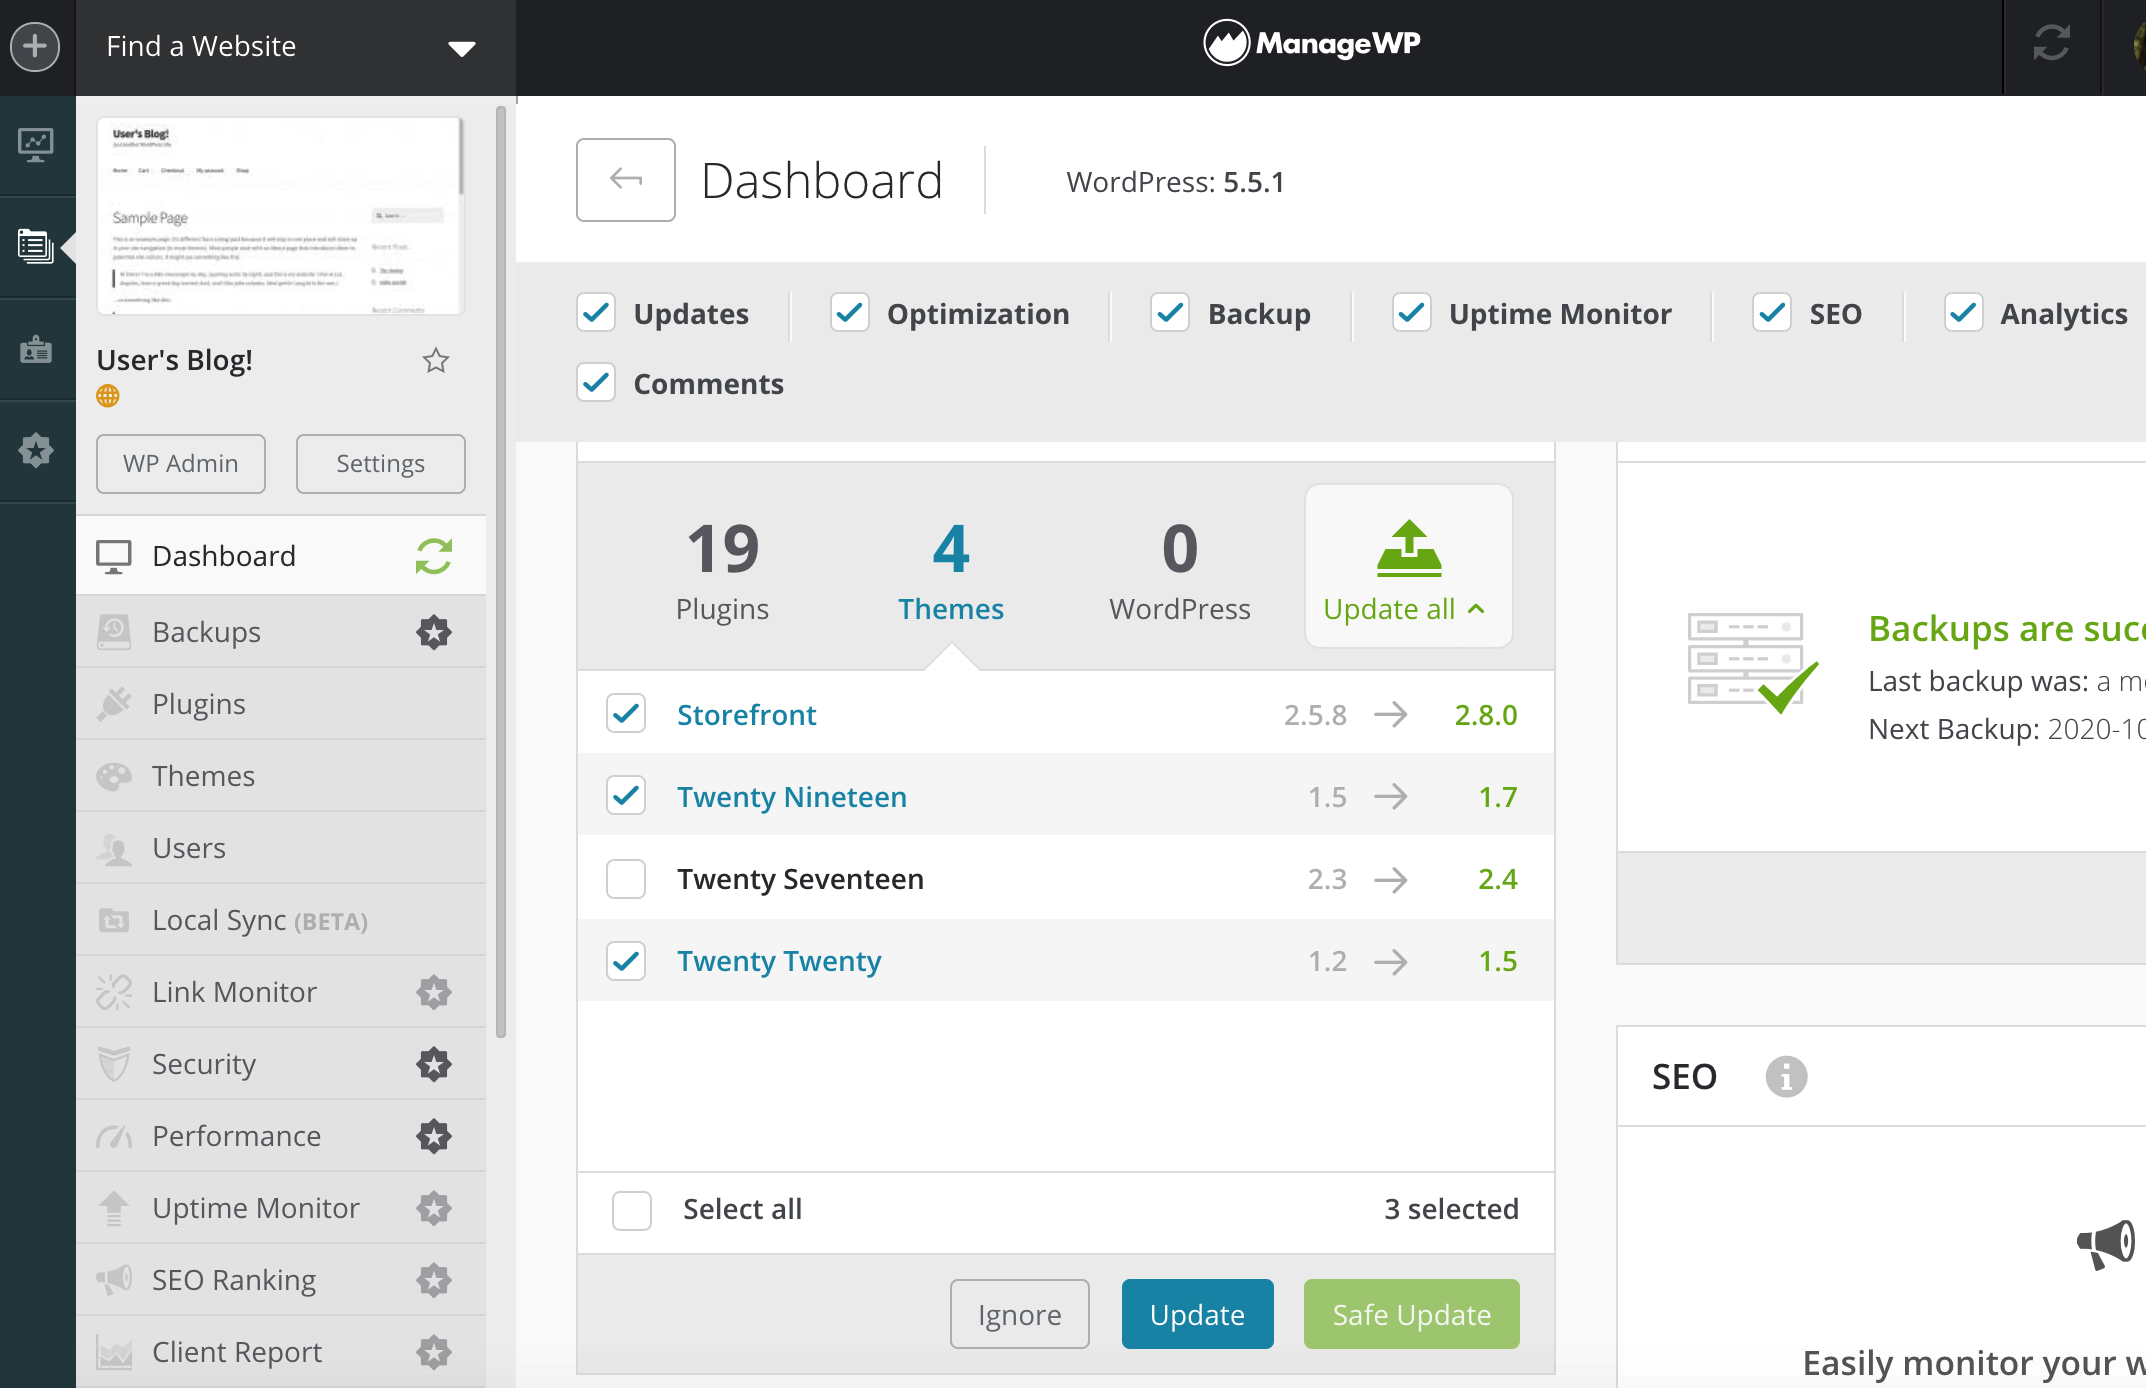 Scheduling theme updates in the ManageWP dashboard.